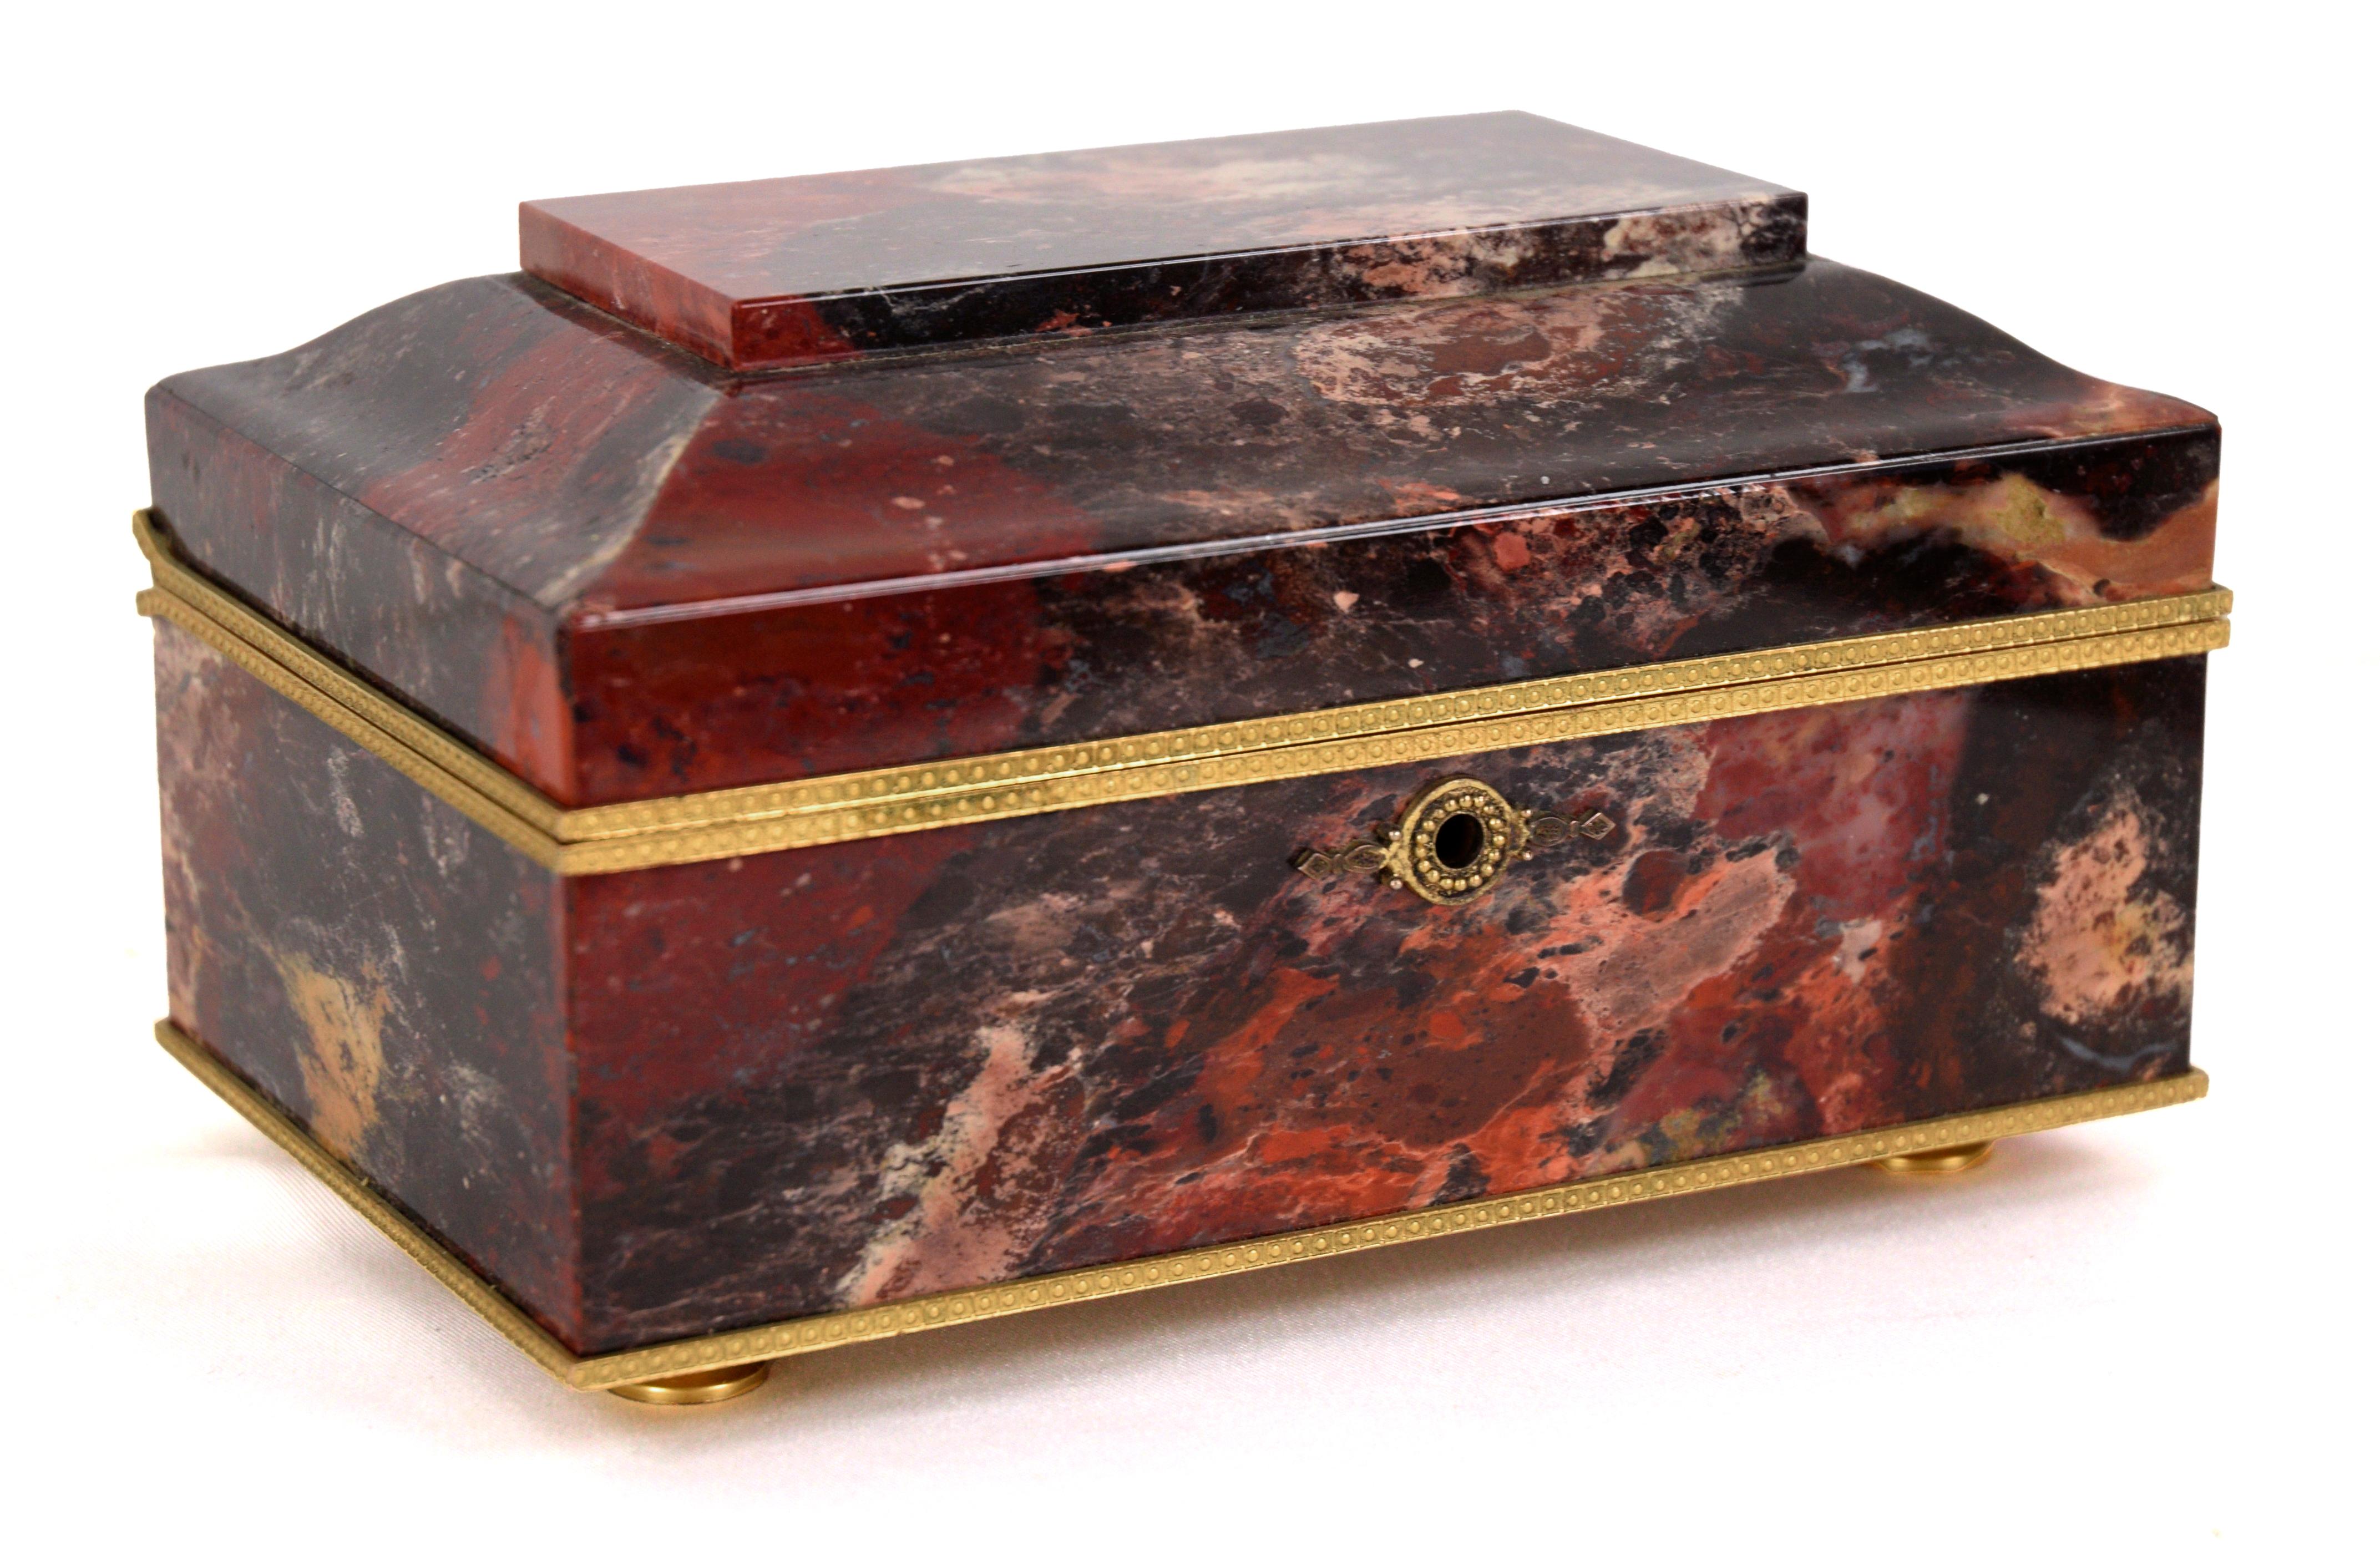 Agate and ormolu French jewel box, the casket form in variegated red, black and pink stone, with hinged lid opening to a velvet lined interior, together with ruby studded key, 3.5